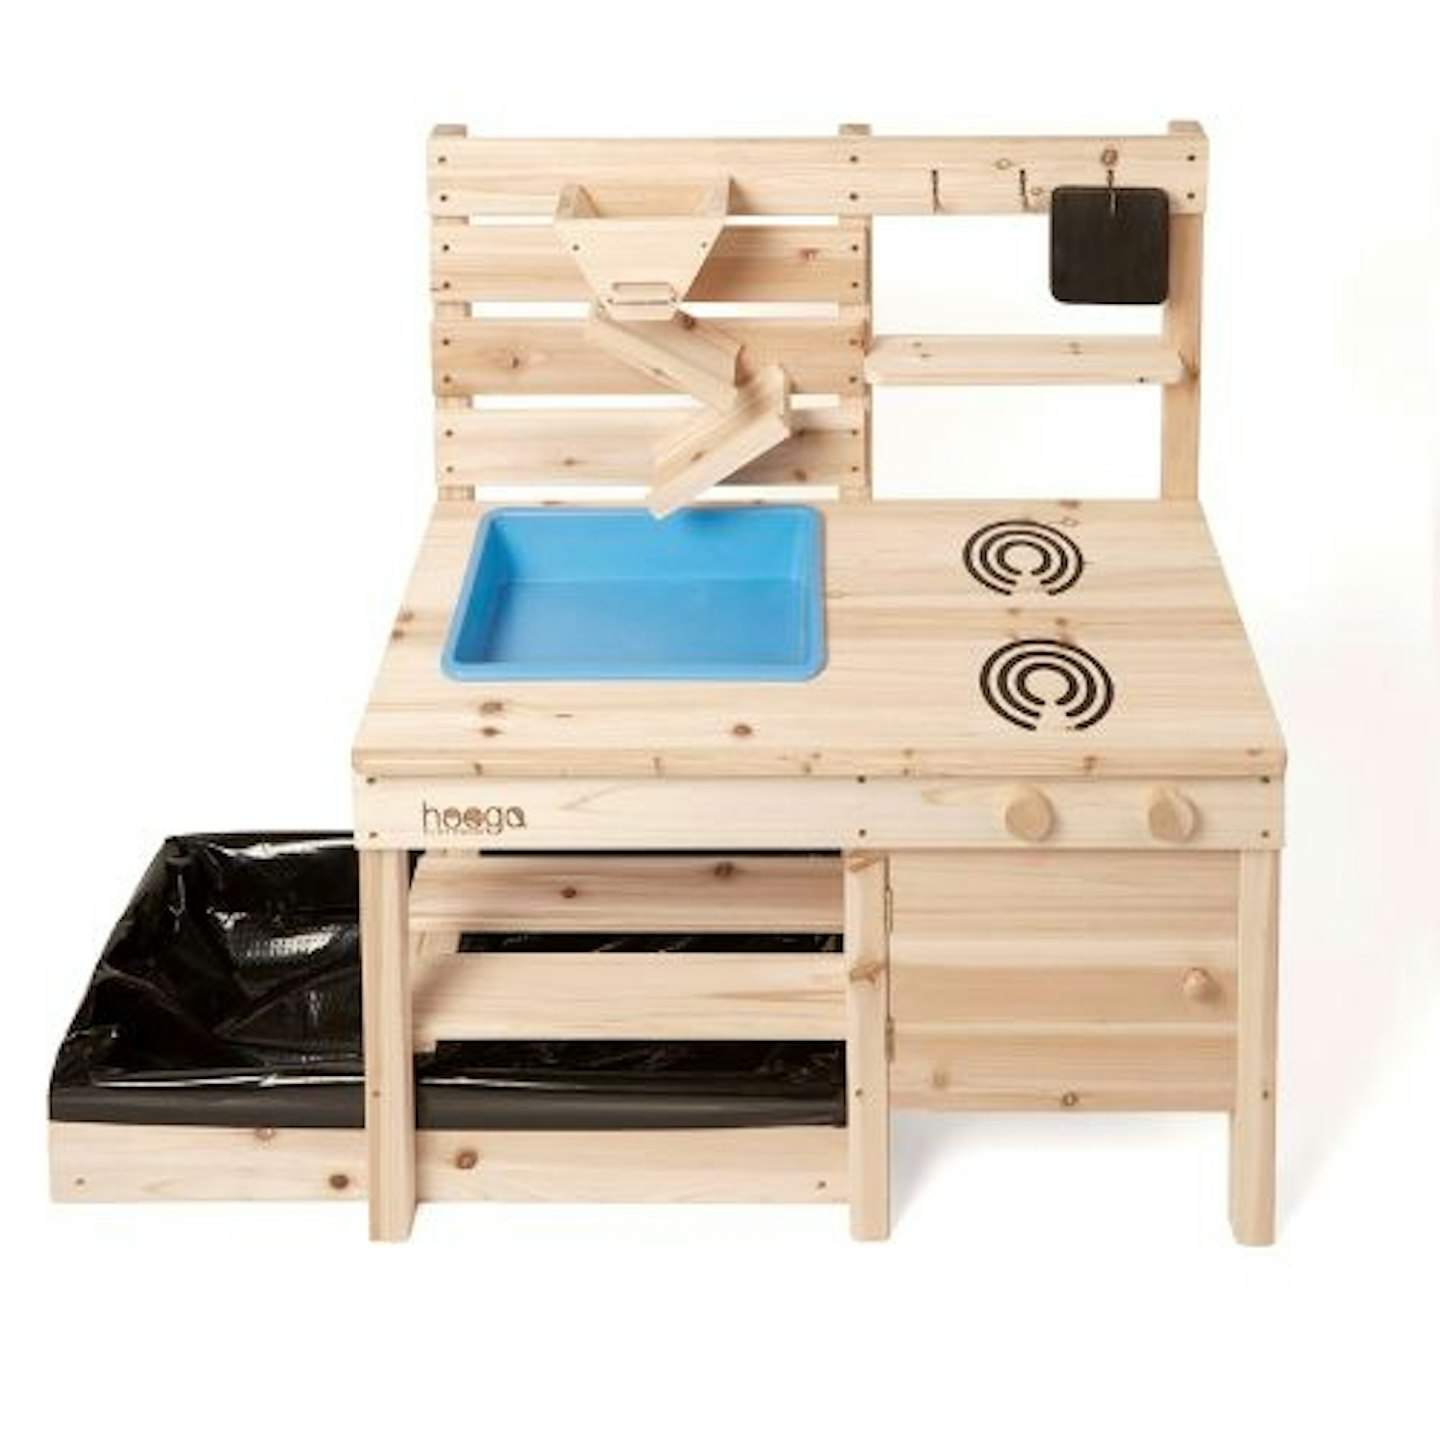 Children's Outdoor Play Kitchen with Sand Play and Sandpit